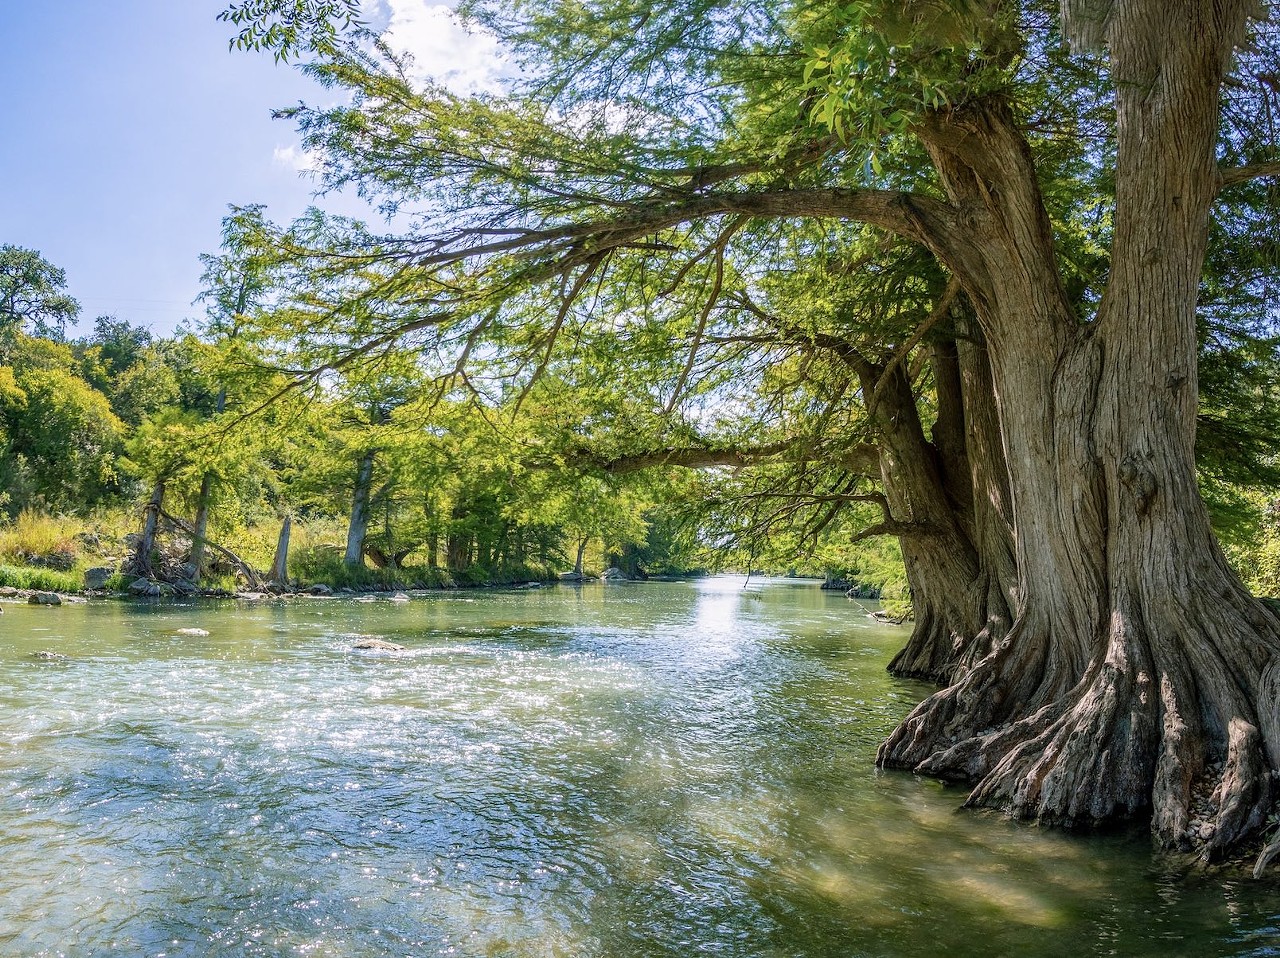 Guadalupe River State Park
3350 Park Road 31, Spring Branch, (830) 438-2656, tpwd.texas.gov
Located just north of San Antonio, Guadalupe River State Park is perfect for an outdoorsy day trip. Certain sections of the park's 13 miles of trails even allow horseback riding! Experienced hikers seeking rougher terrain can also try the lesser-traveled Bauer Unit.